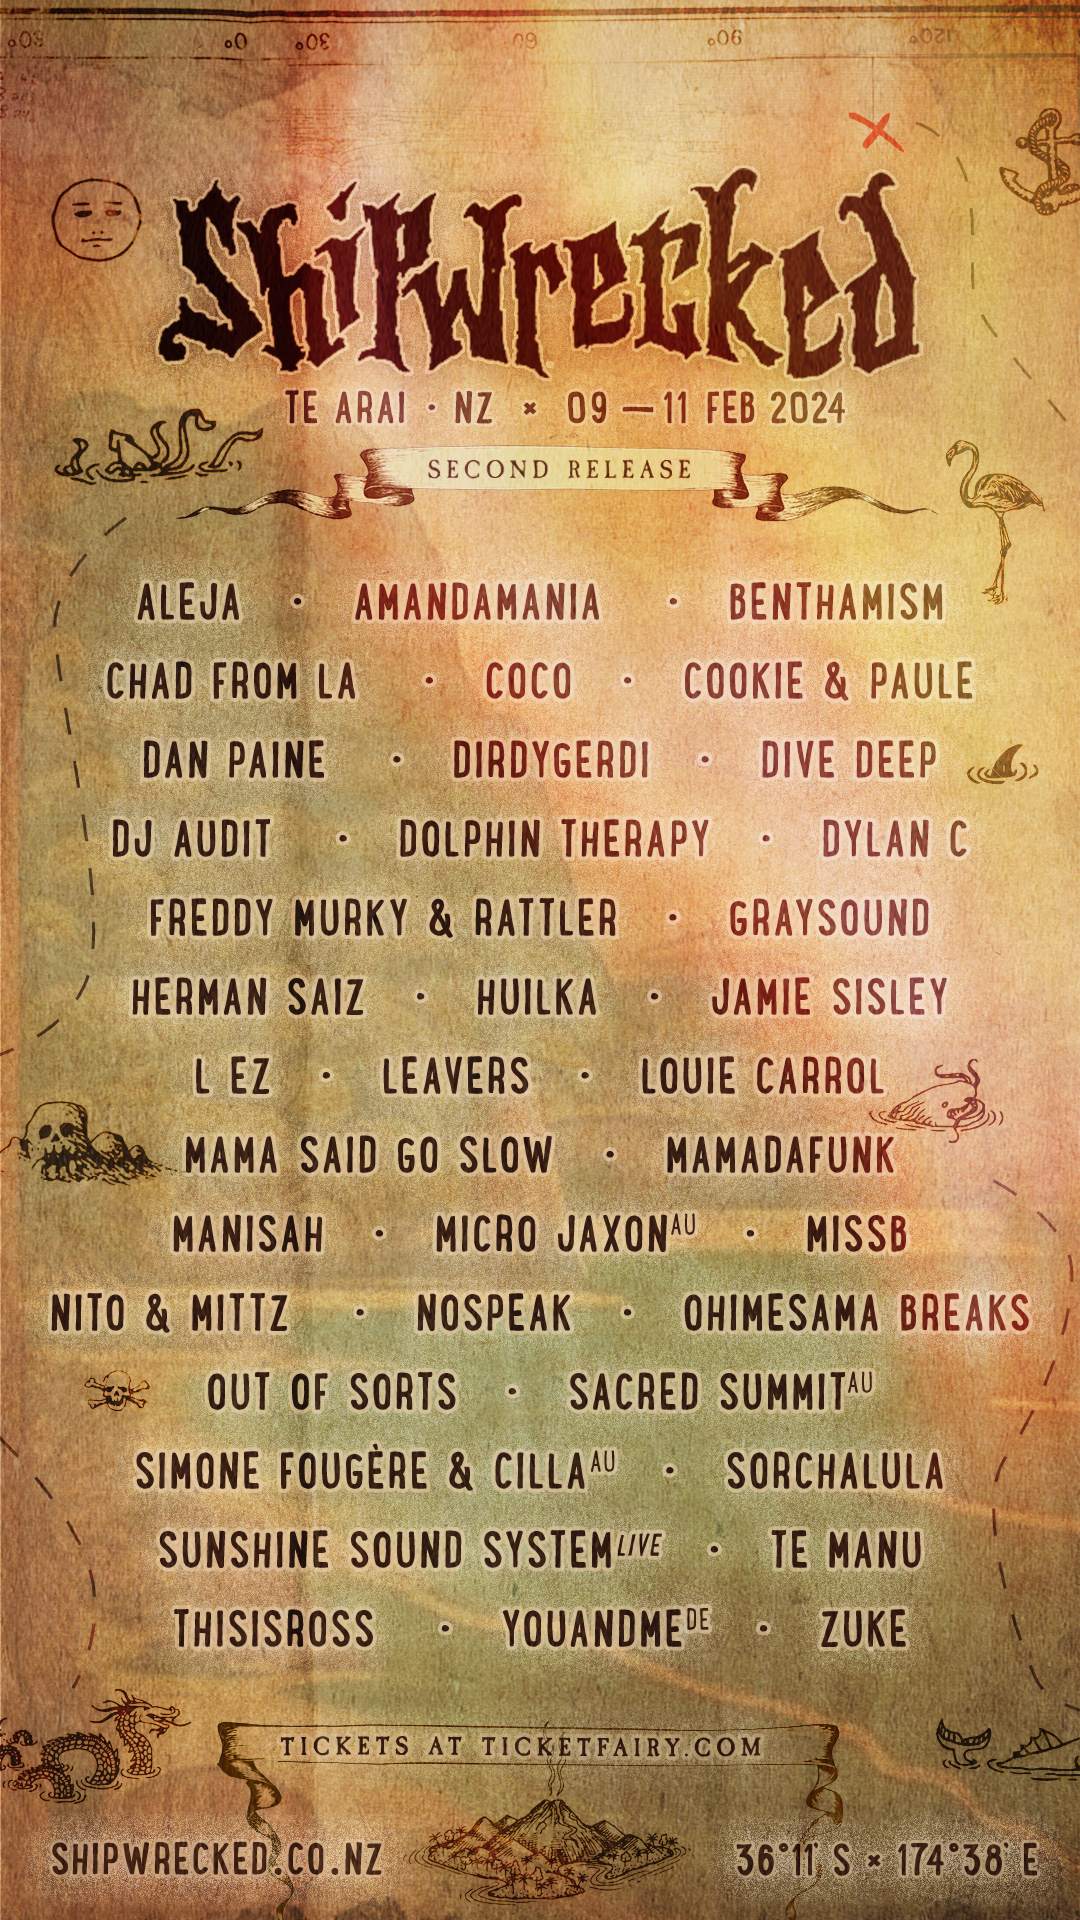 Shipwrecked Music & Arts Festival 2024 at Shipwrecked Festival, New Zealand